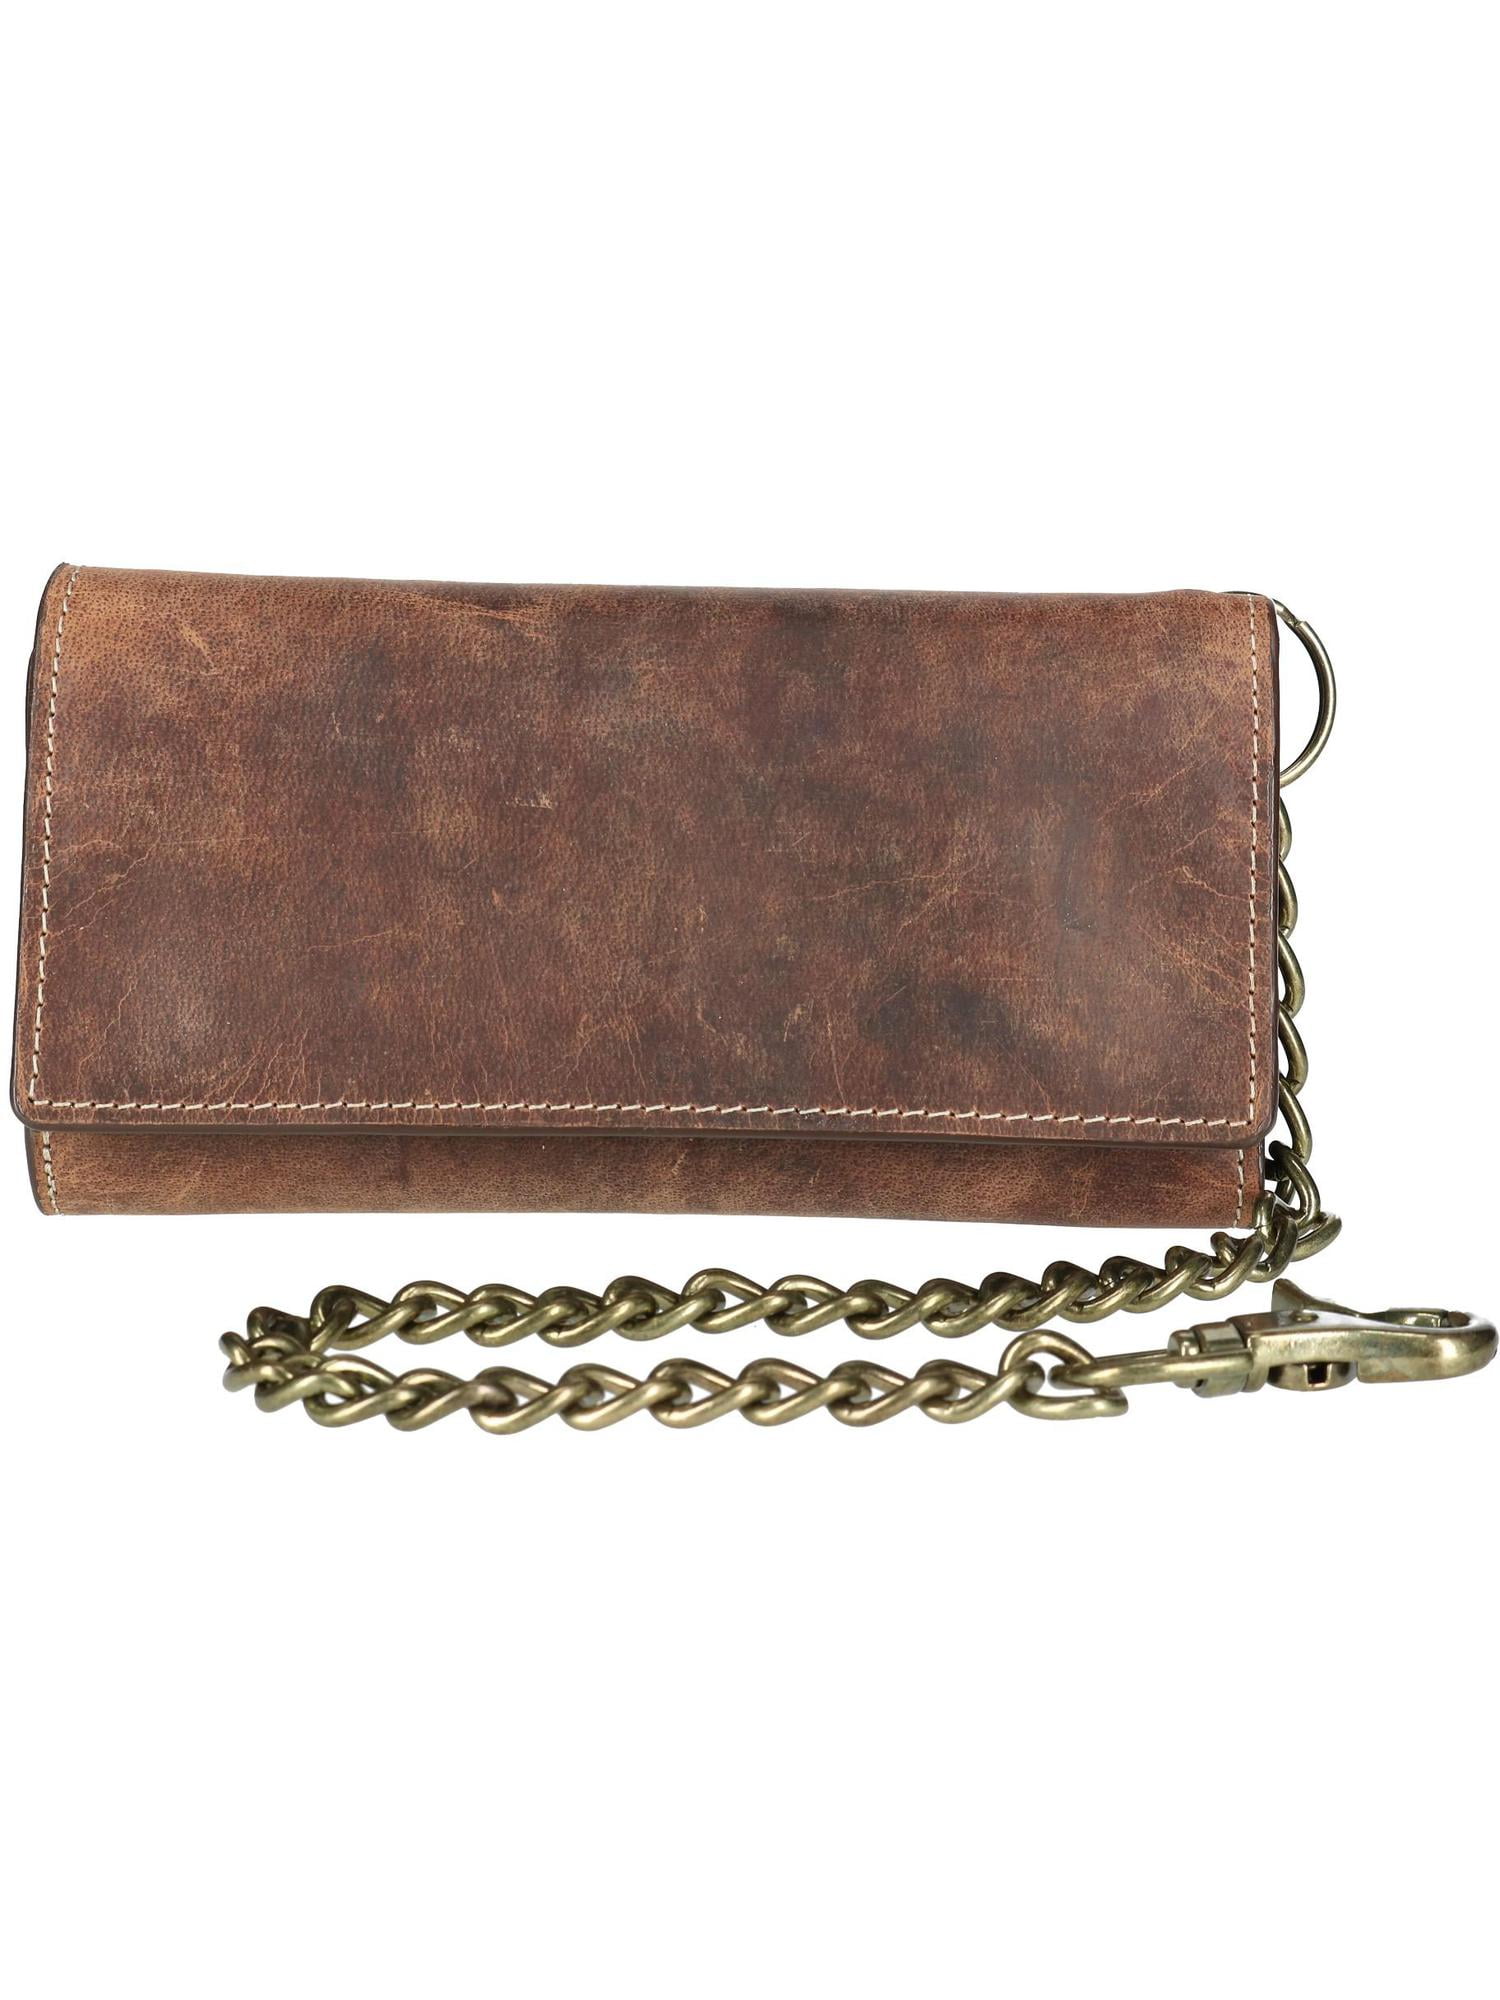 CTM - CTM® Crazy Horse Leather RFID Long Trifold Chain Wallet (Men&#39;s) - mediakits.theygsgroup.com - mediakits.theygsgroup.com